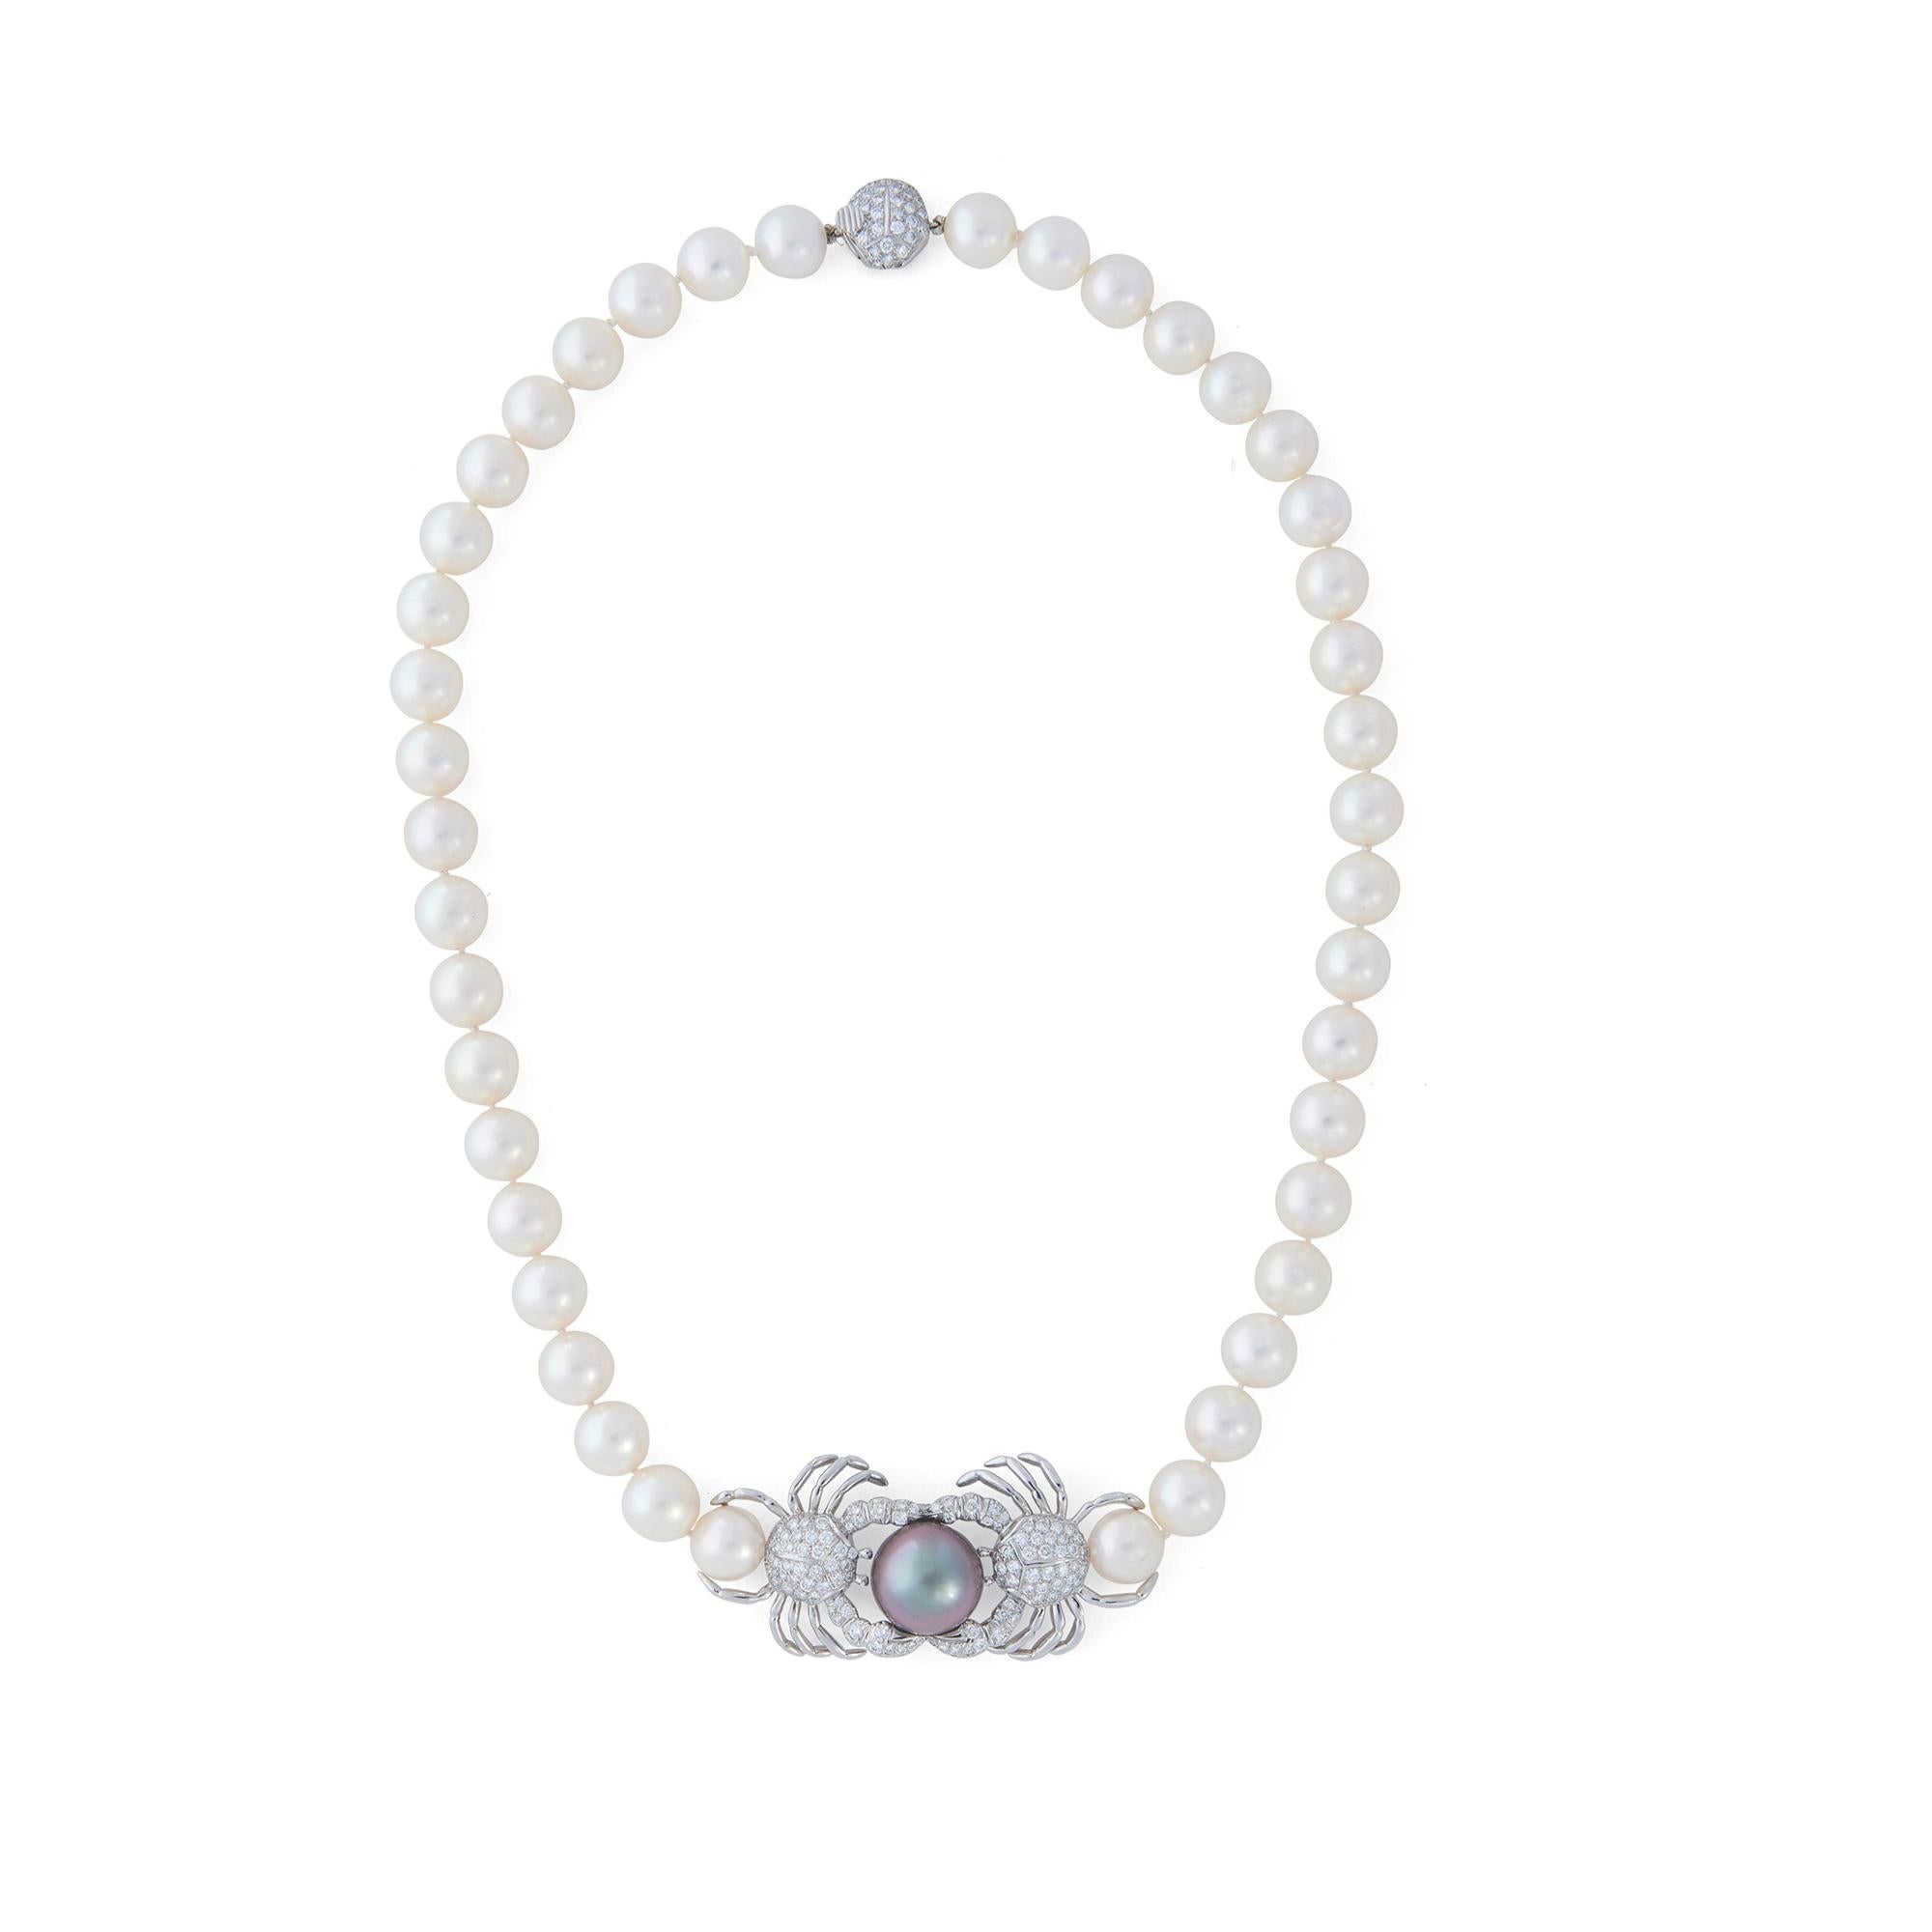 Authentic Tiffany & Co. necklace designed as a strand of round white cultured pearls and featuring a pair of platinum crabs pave-set with high-quality round brilliant cut diamonds weighing an estimated 2.00 carats. A Tahitian pearl measuring